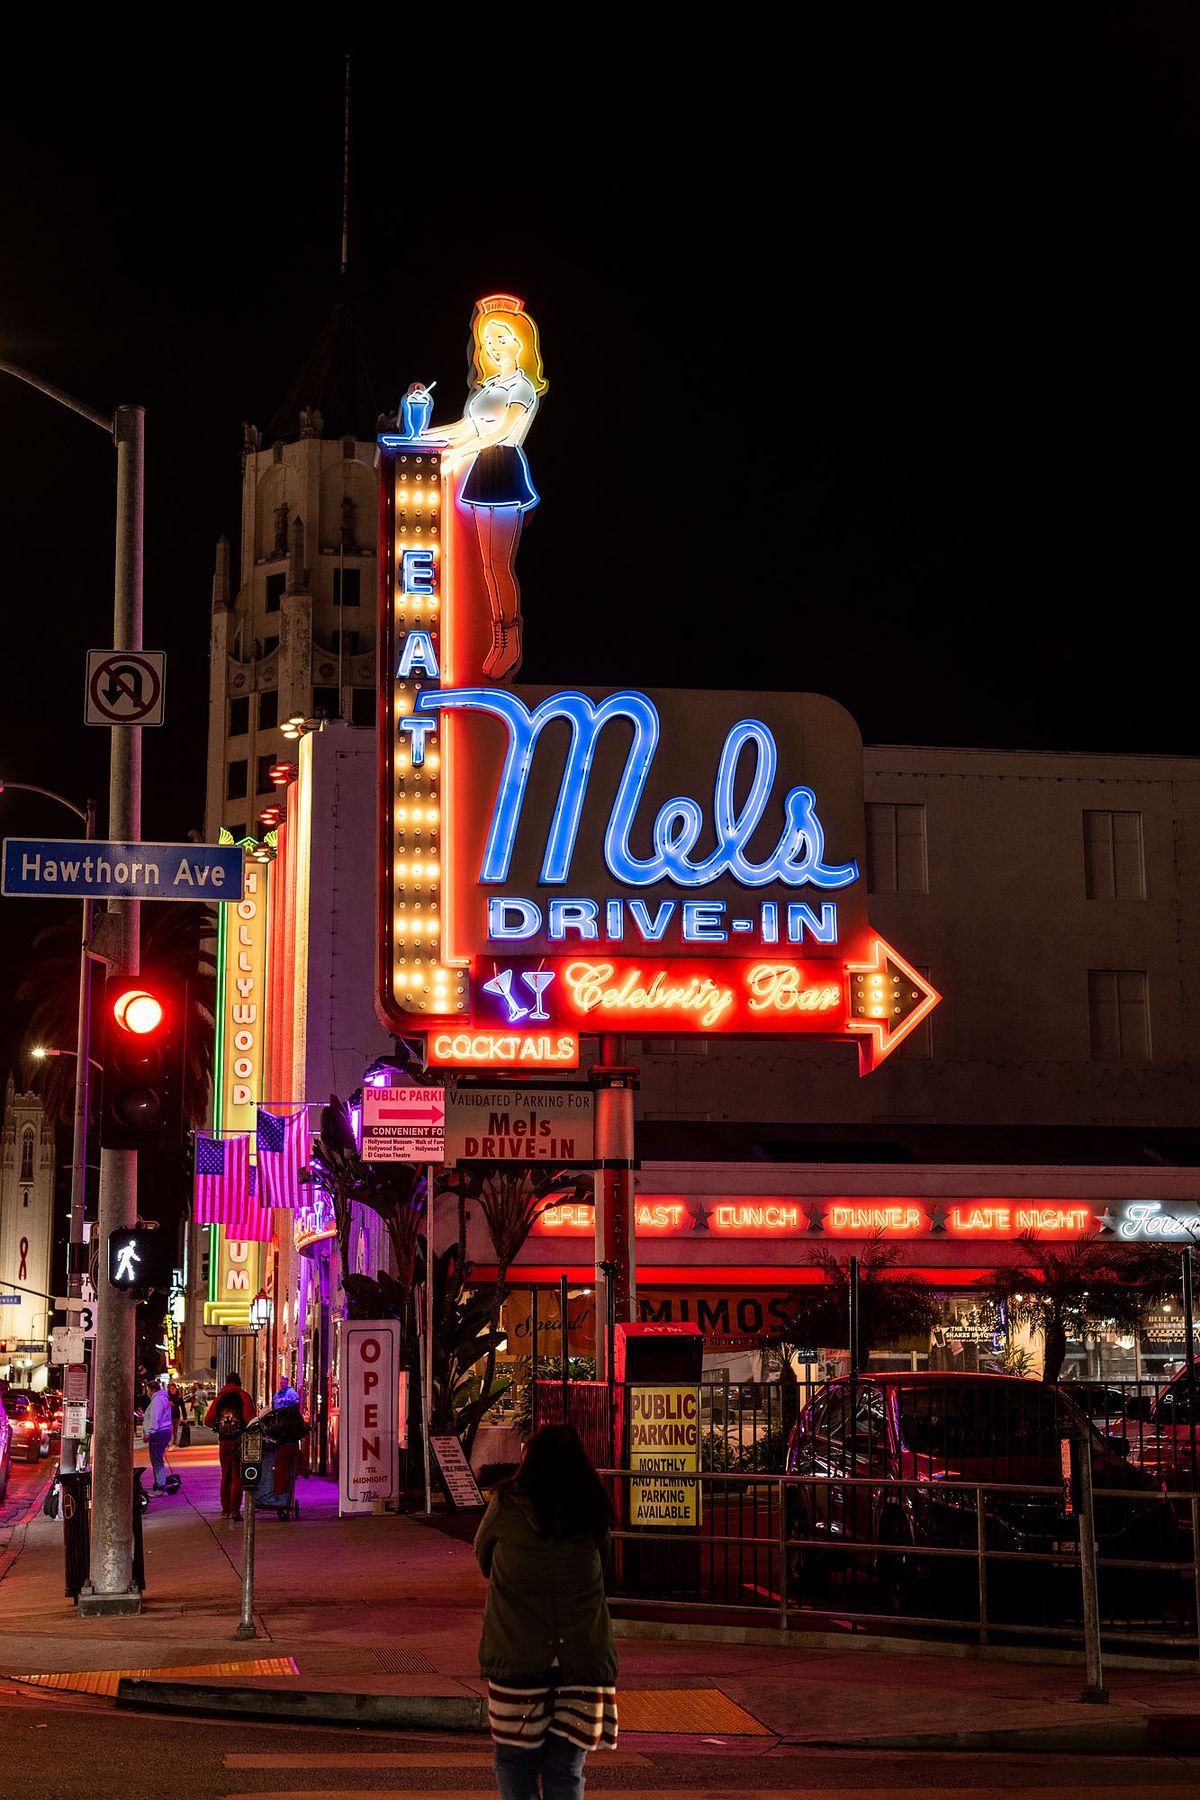 A tall neon sign showing parking lot entry into a vintage diner, at night.